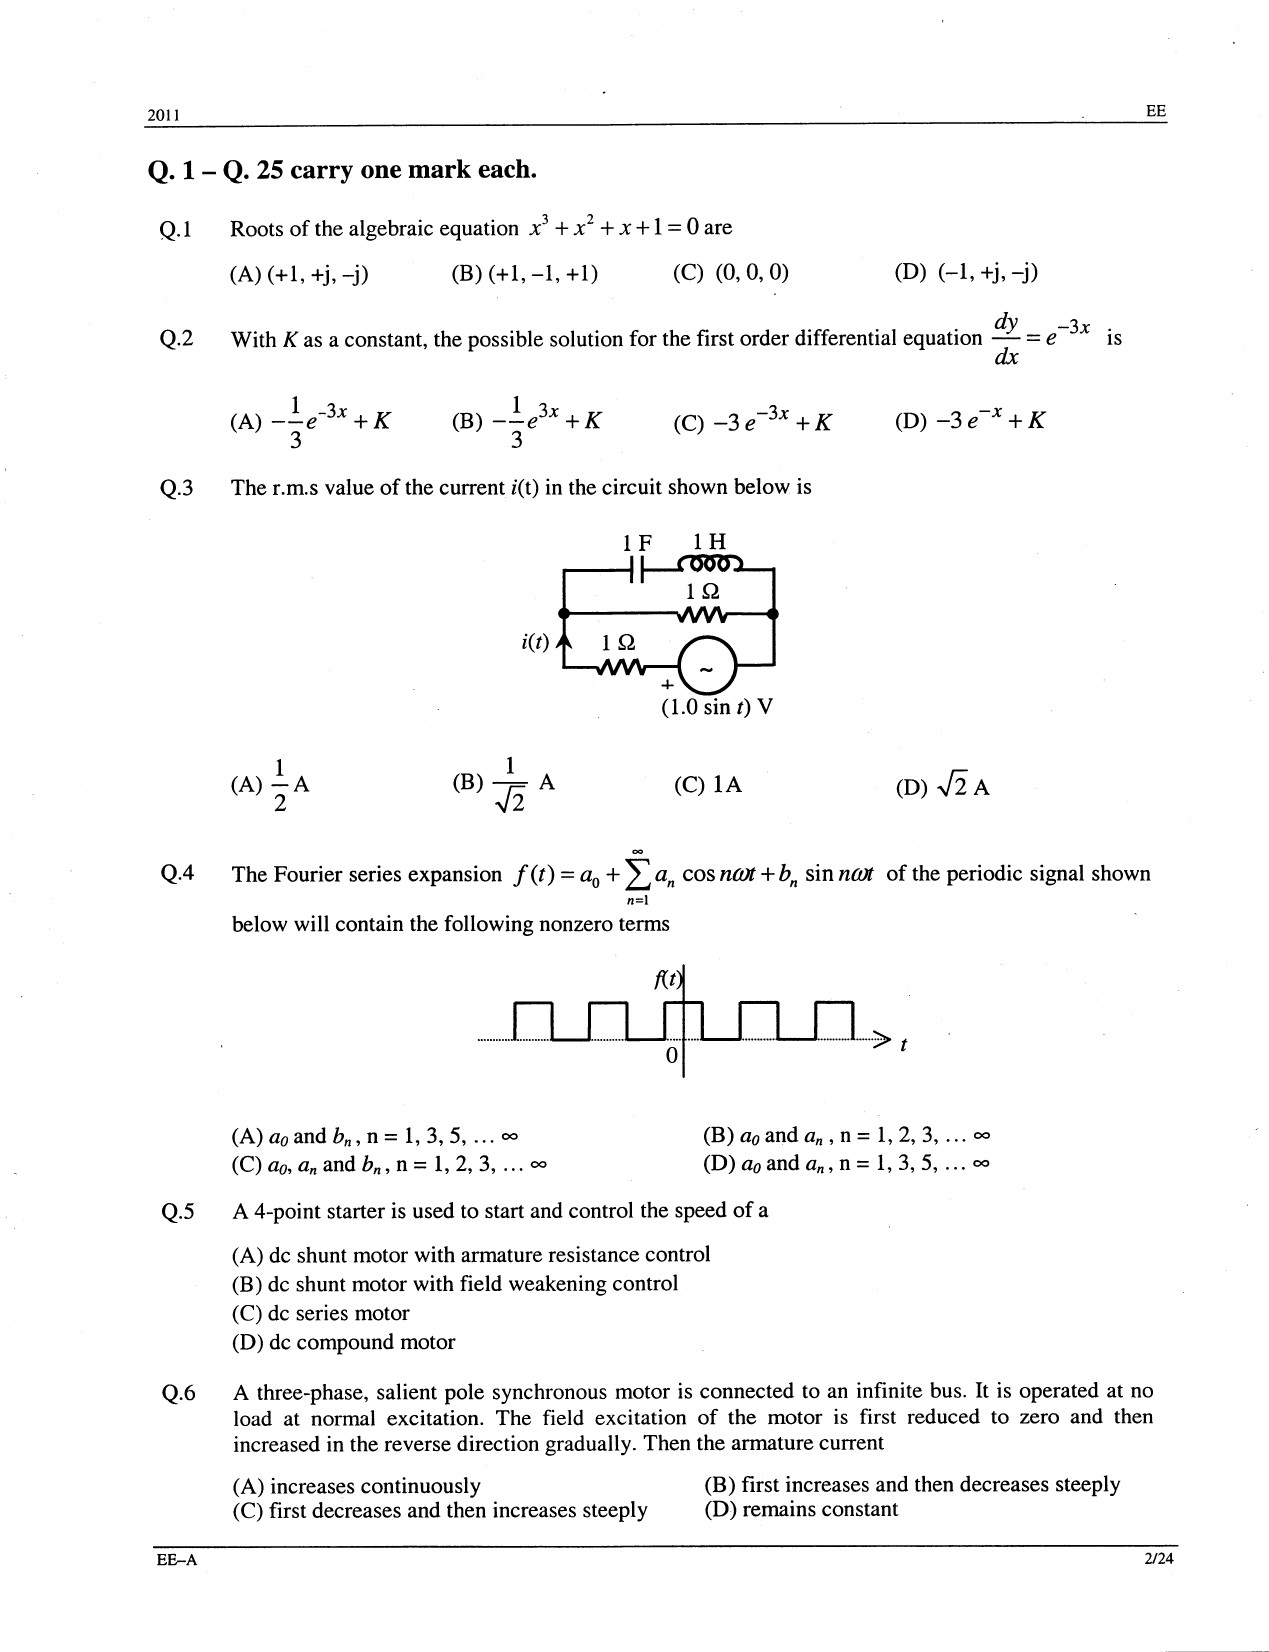 GATE Exam Question Paper 2011 Electrical Engineering 2